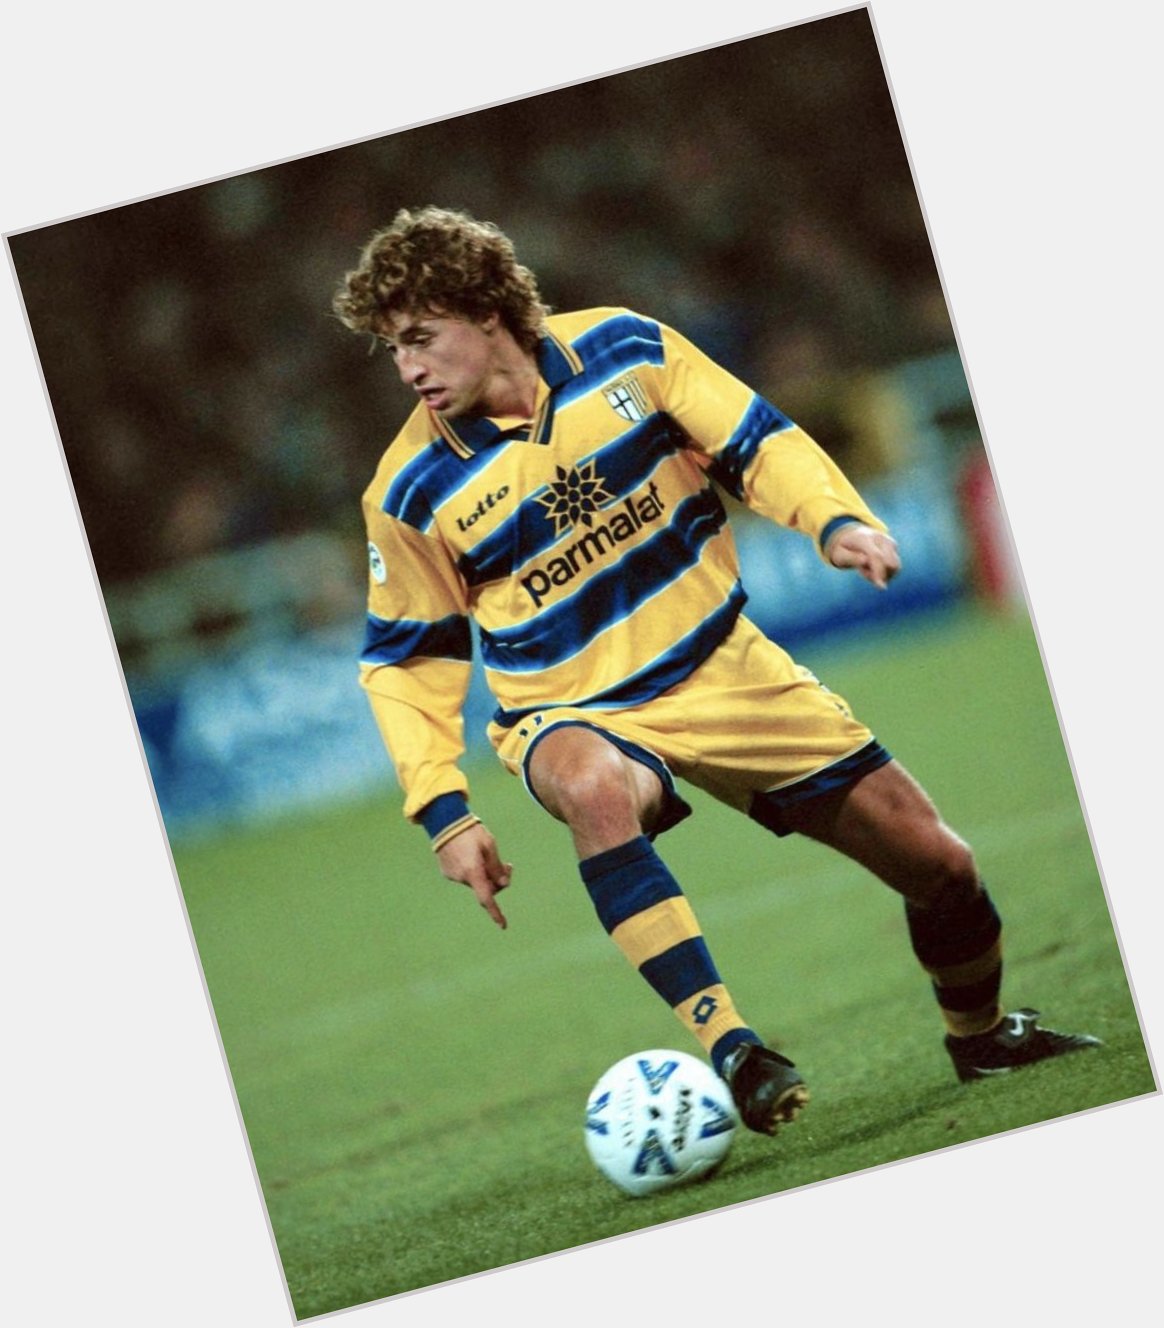 Happy Birthday Hernán Crespo! He wore some cracking kits during his career 